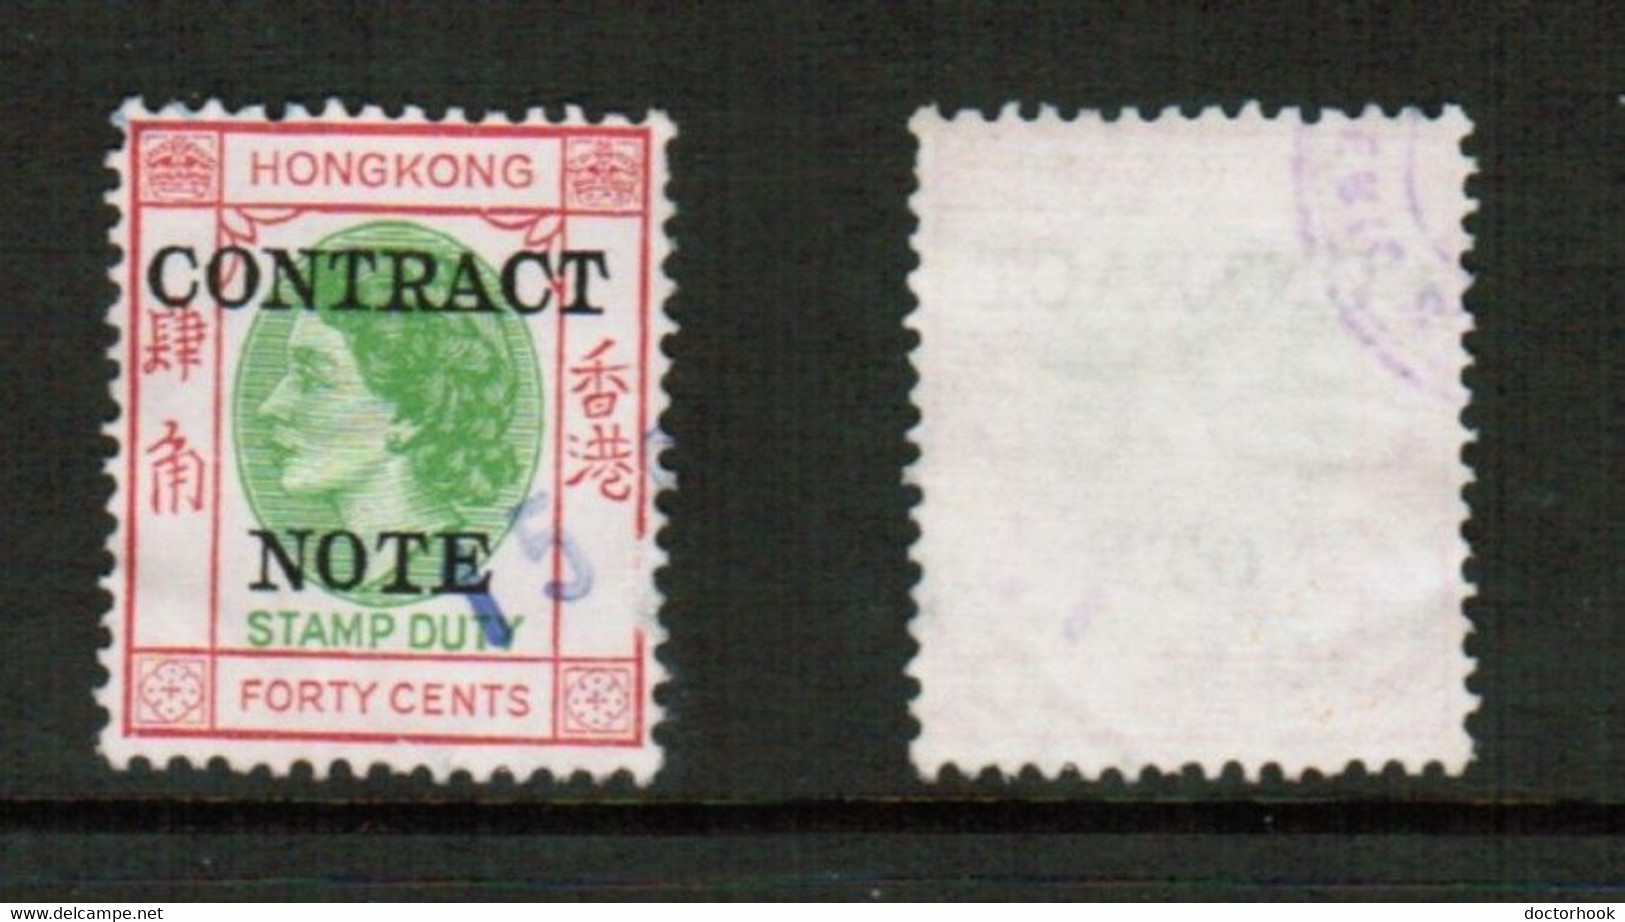 HONG KONG   40 CENT CONTRACT NOTE FISCAL USED THIN (CONDITION AS PER SCAN) (Stamp Scan # 828-10) - Stempelmarke Als Postmarke Verwendet